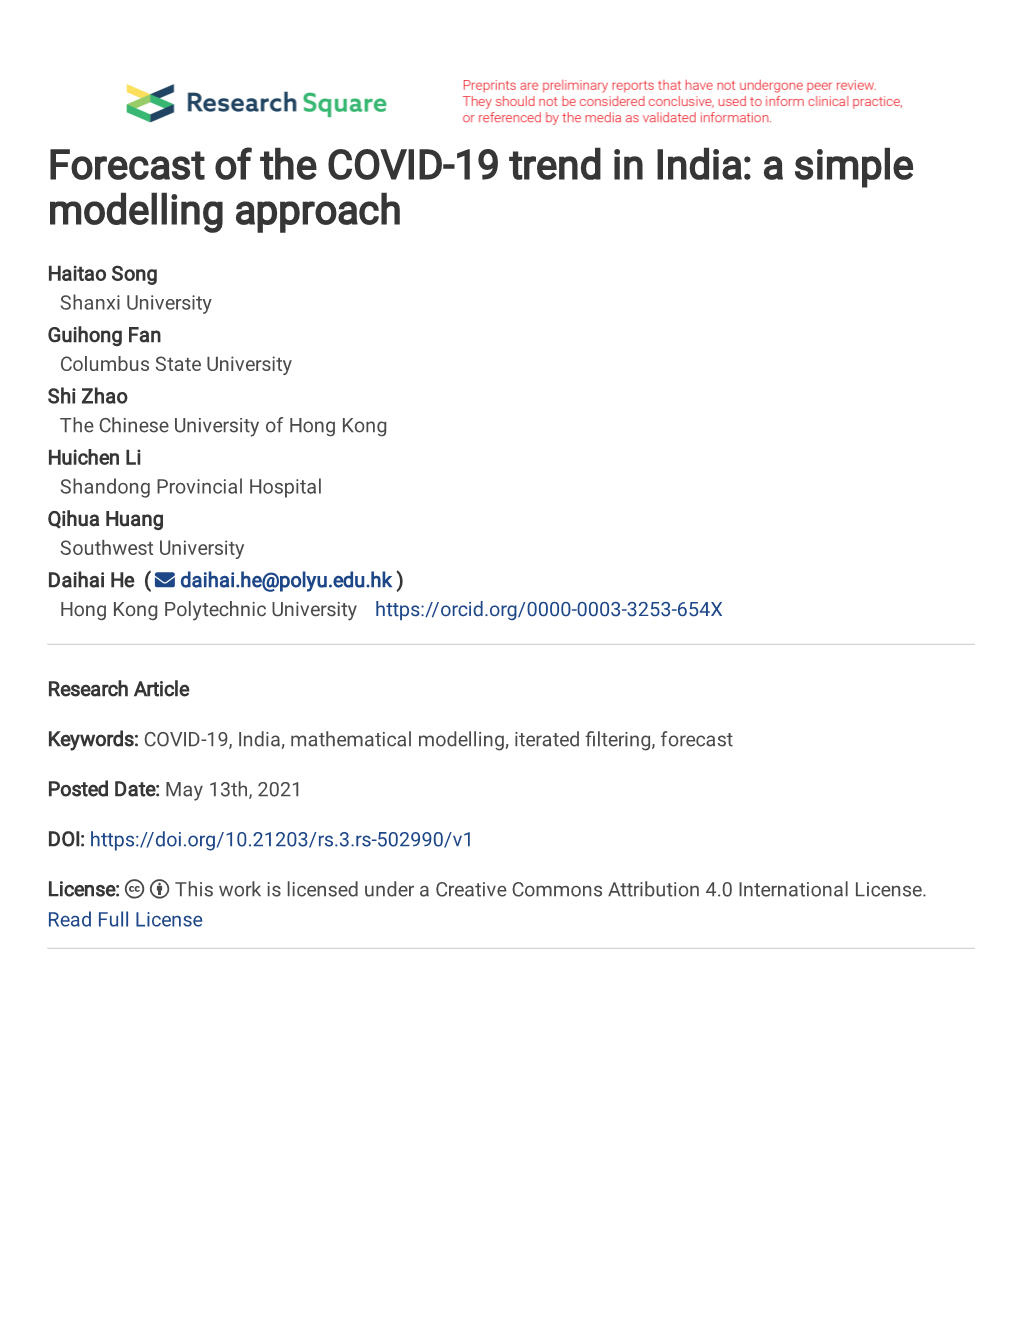 Forecast of the COVID-19 Trend in India: a Simple Modelling Approach